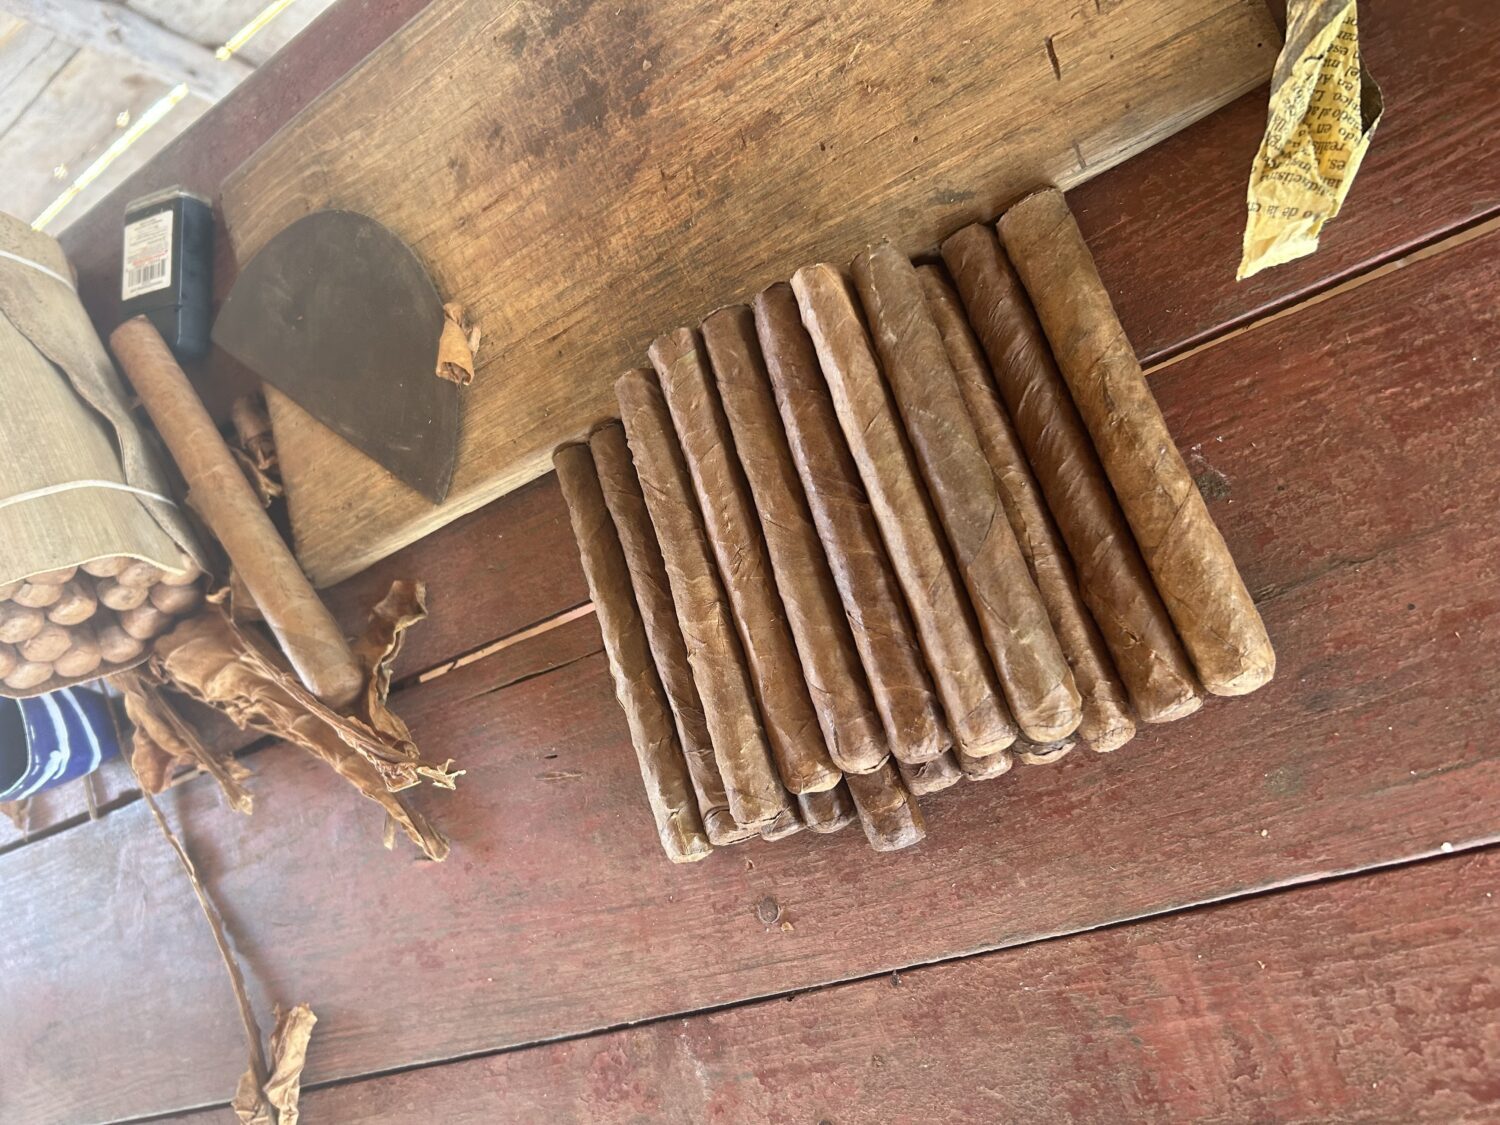 Cigars on a table